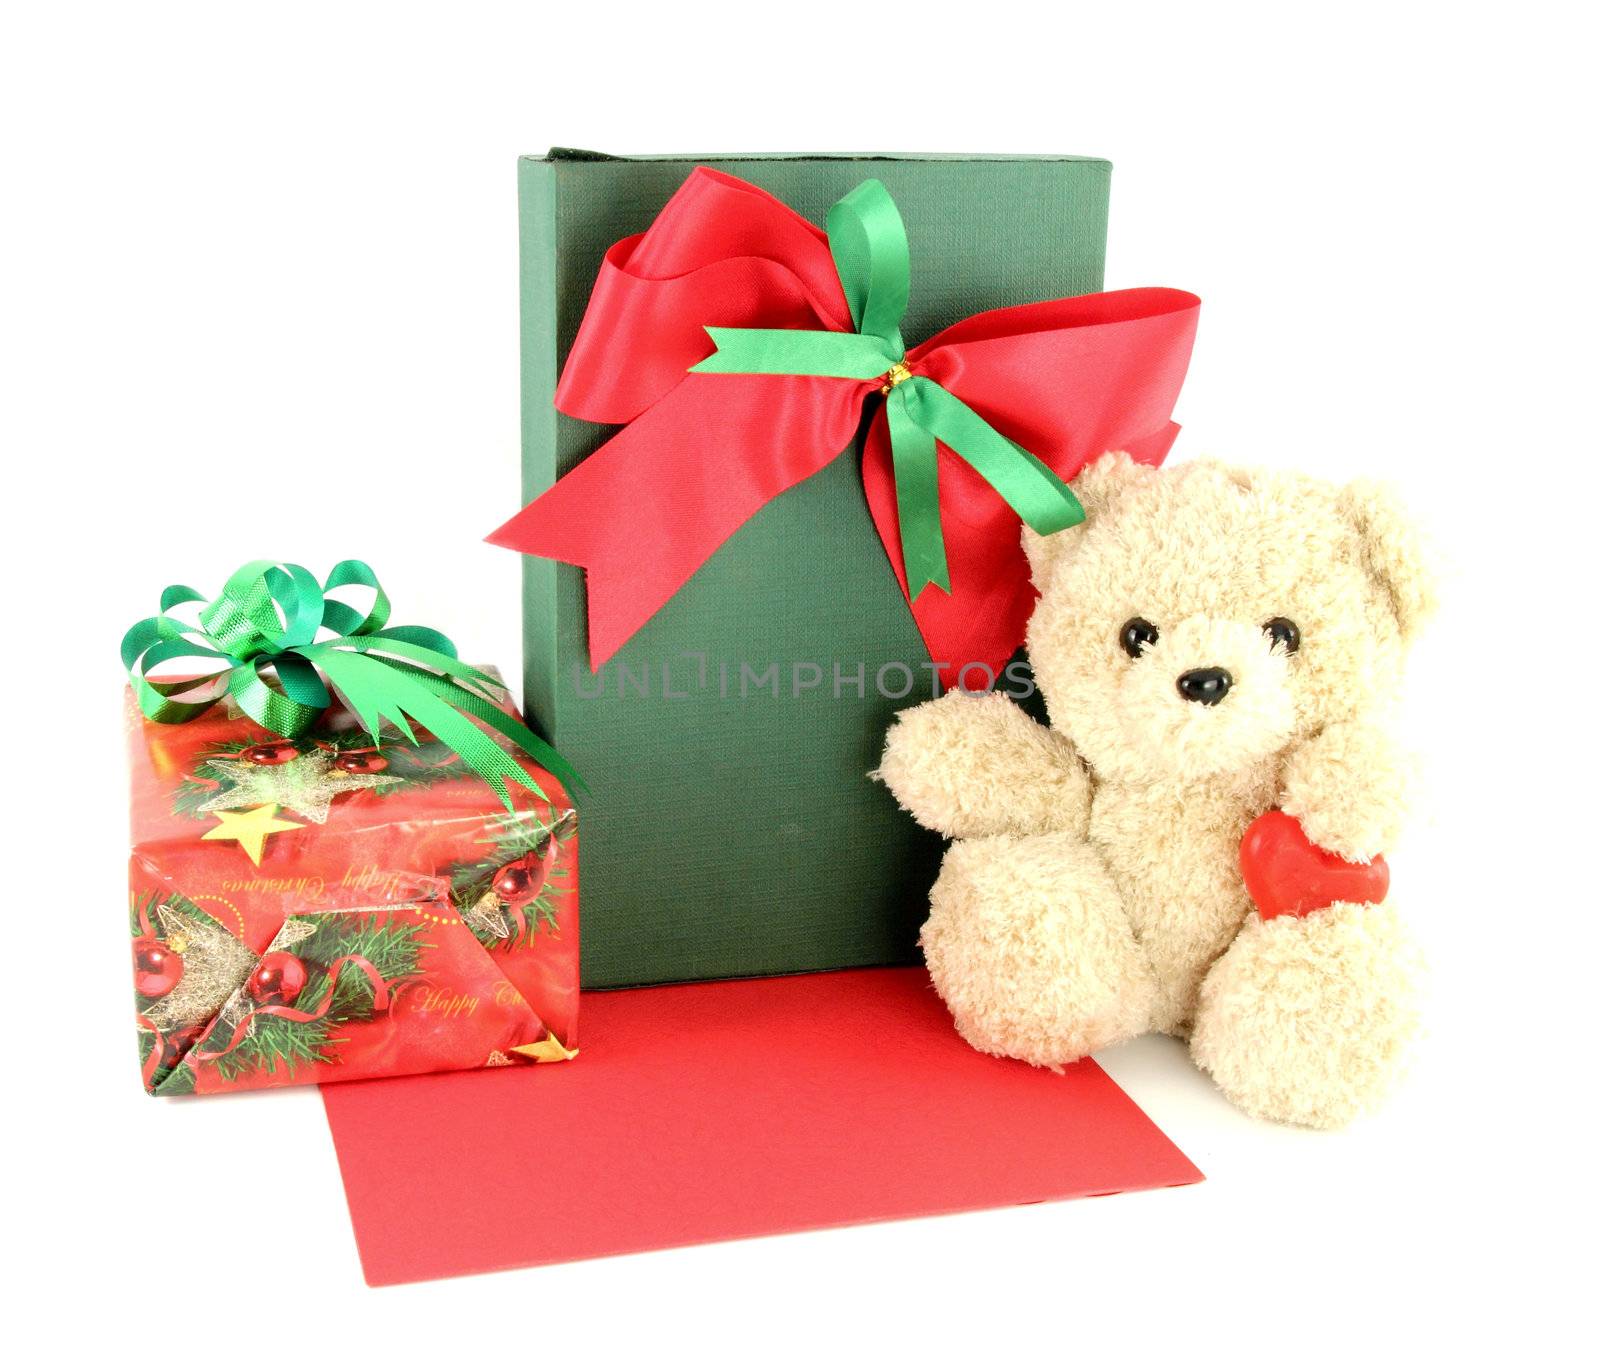 Teddy bear and card and gift on white background